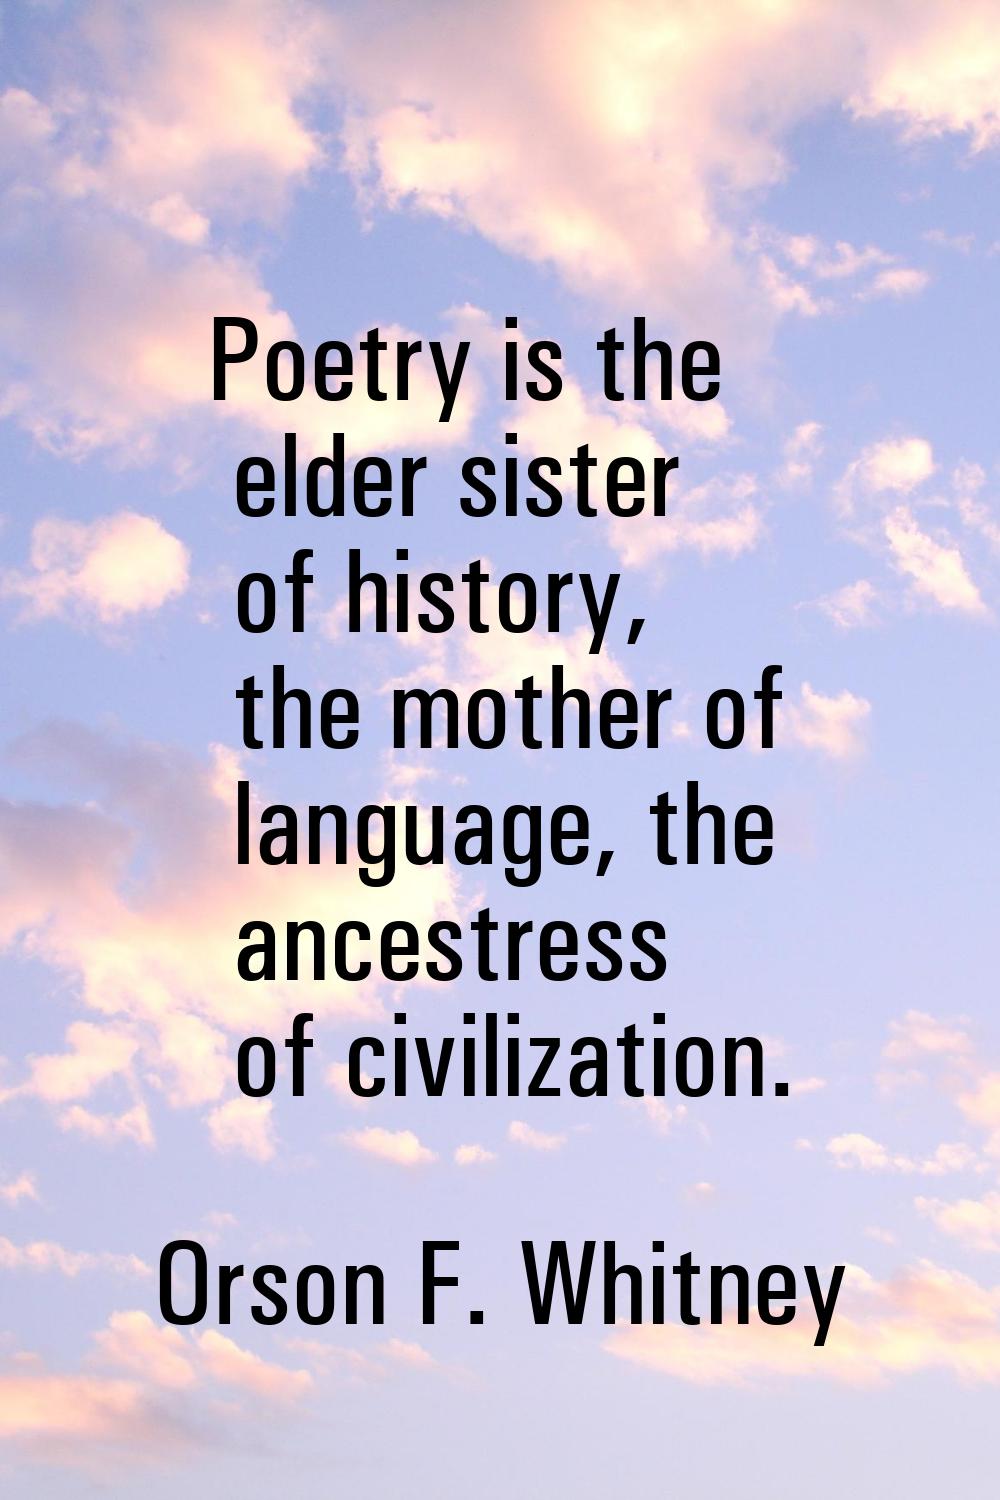 Poetry is the elder sister of history, the mother of language, the ancestress of civilization.